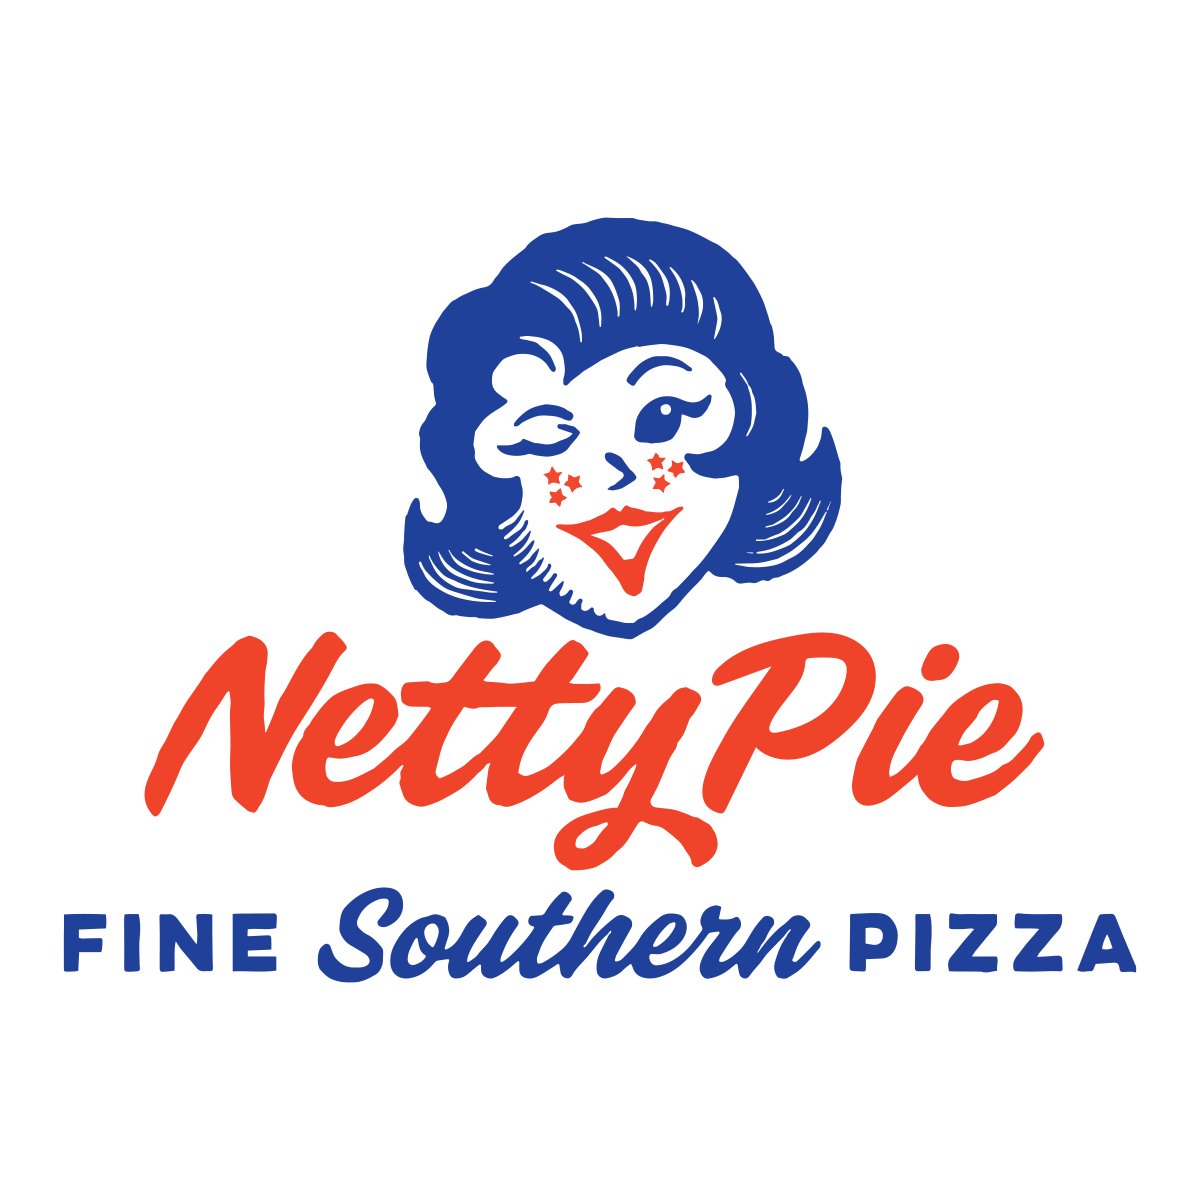 Netty Pie (Rough) logo design by logo designer TrioSigns,Inc. for your inspiration and for the worlds largest logo competition